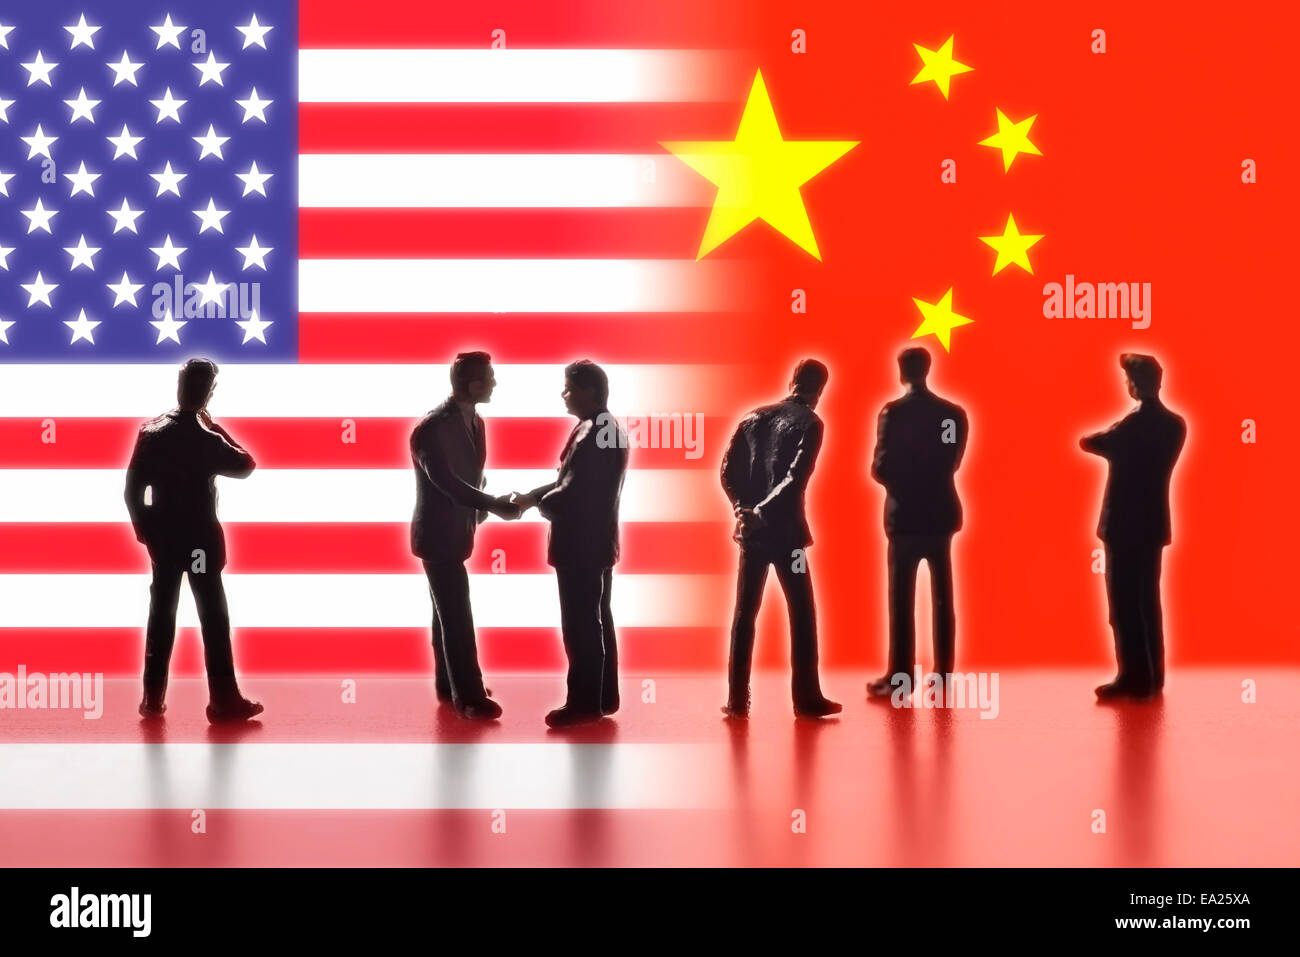 Model figures symbolizing politicians are facing the flags of China and the USA. Two of them shake hands. Stock Photo